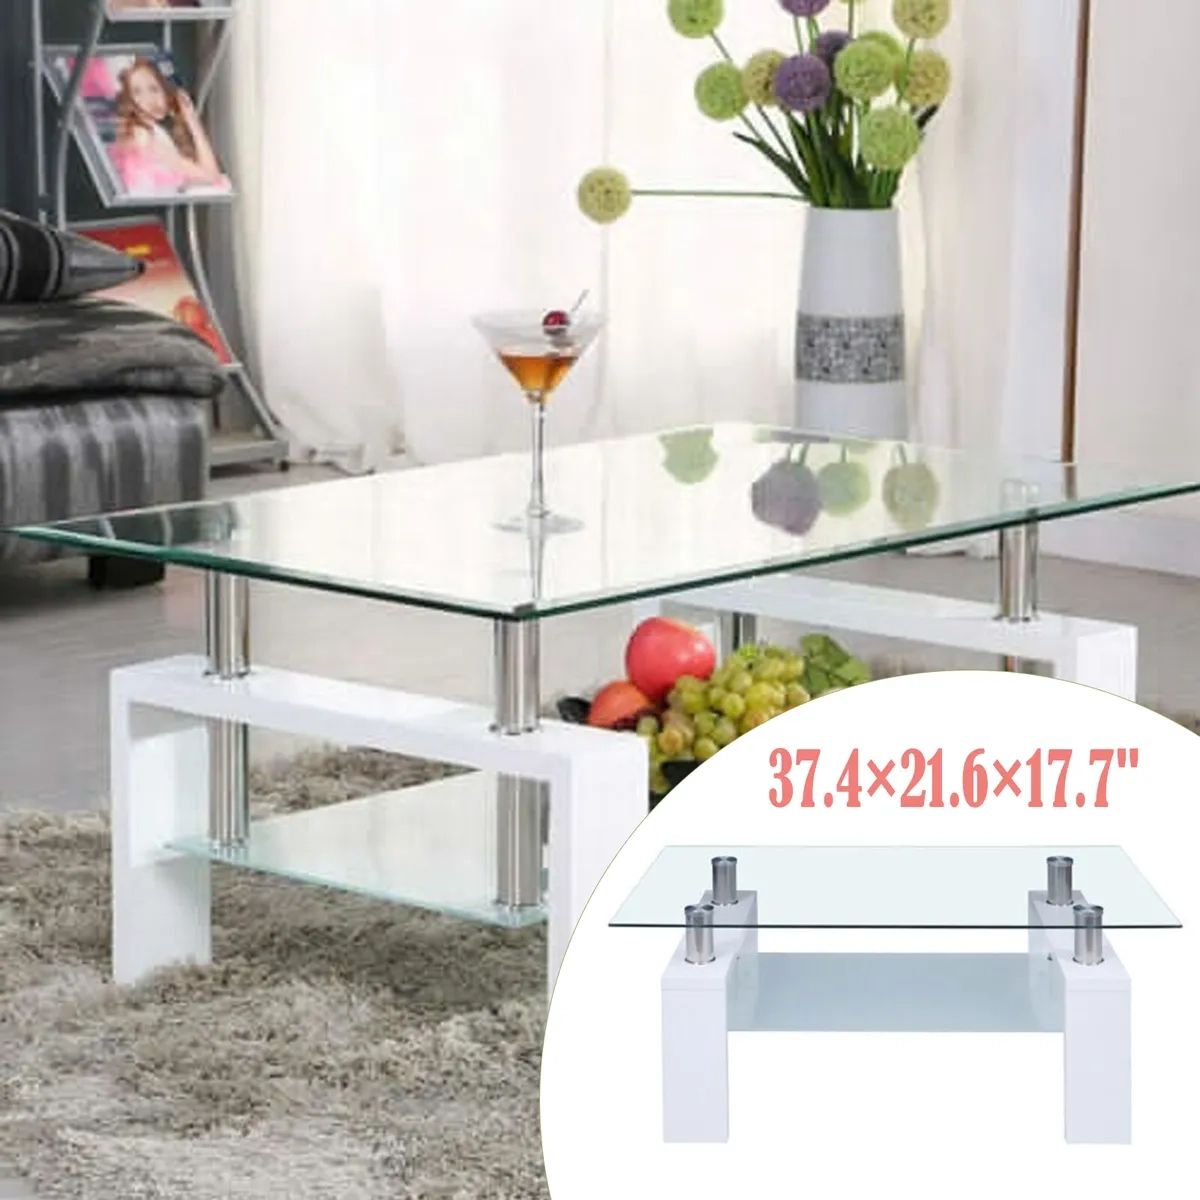 2 Layer Glass Coffee Table For Living Room With Mdf Legs & Storage Shelf  Tables | Ebay Regarding Glass Coffee Tables With Lower Shelves (View 12 of 15)